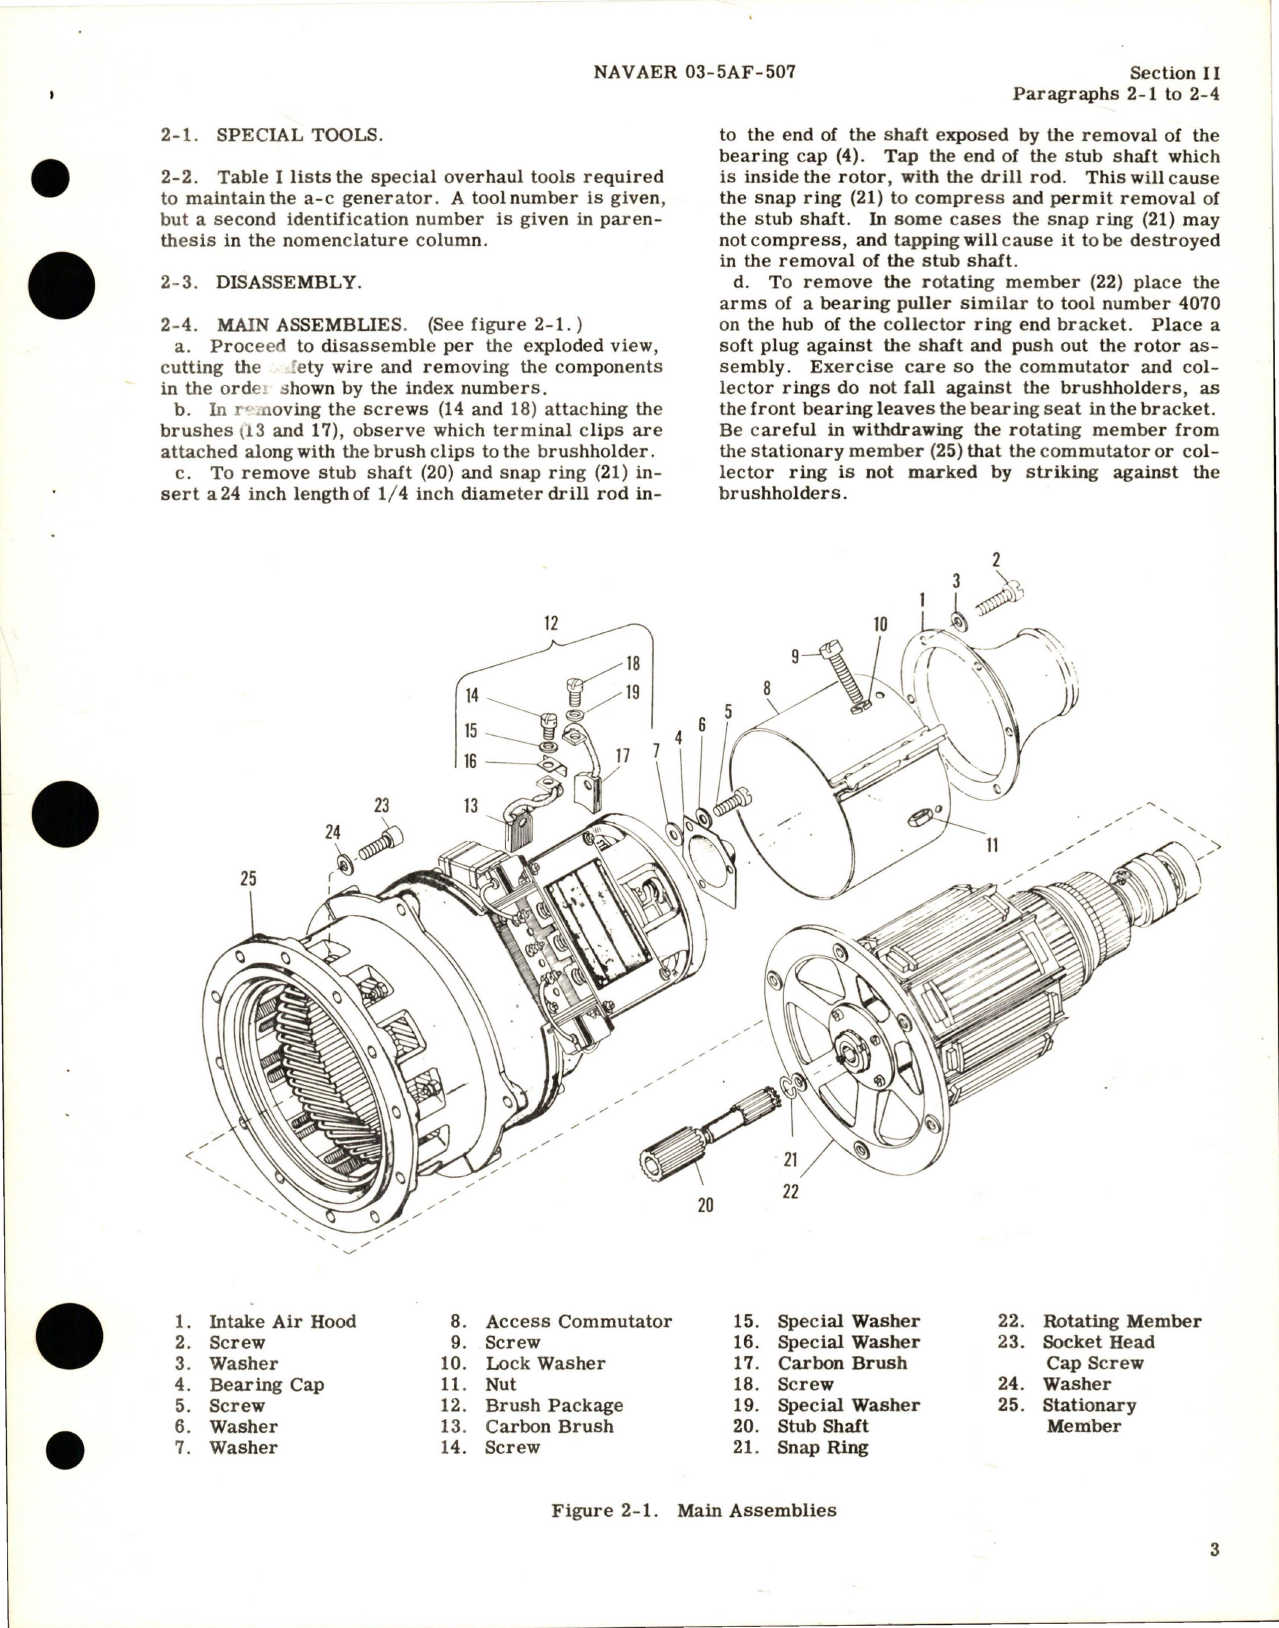 Sample page 5 from AirCorps Library document: Overhaul Instructions for AC Generator - Model A50J185-2 